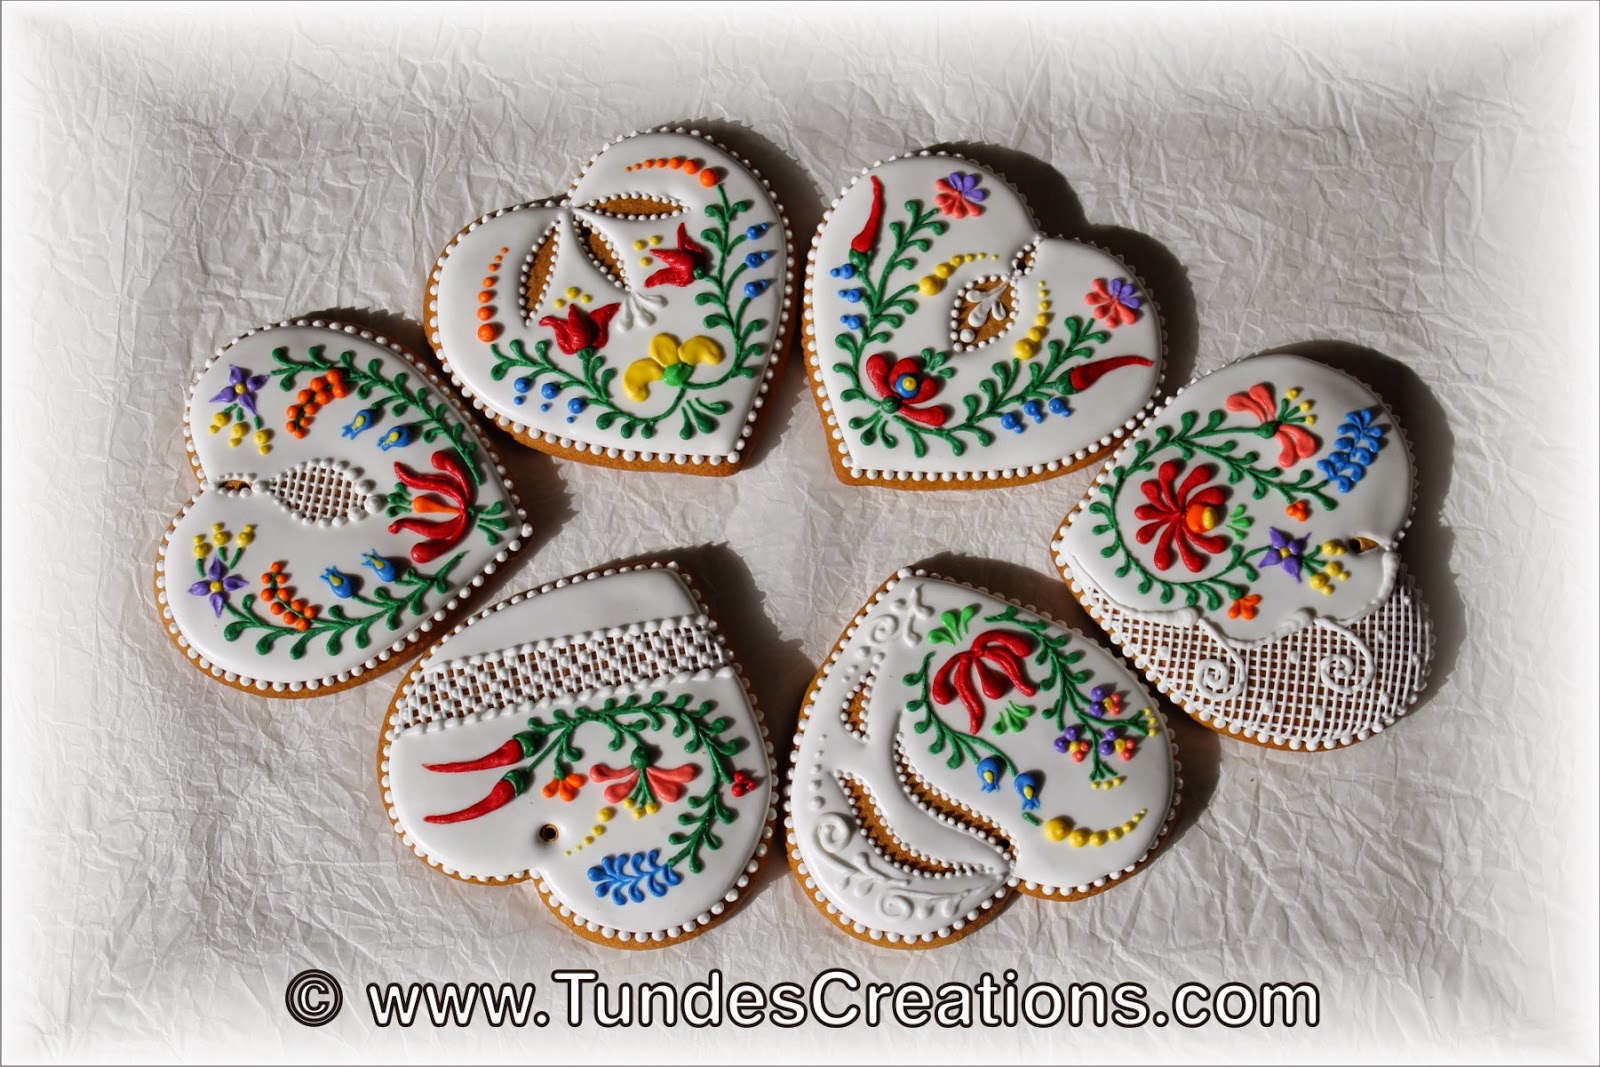 Gingerbread cookies with Hungarian folk art pattern